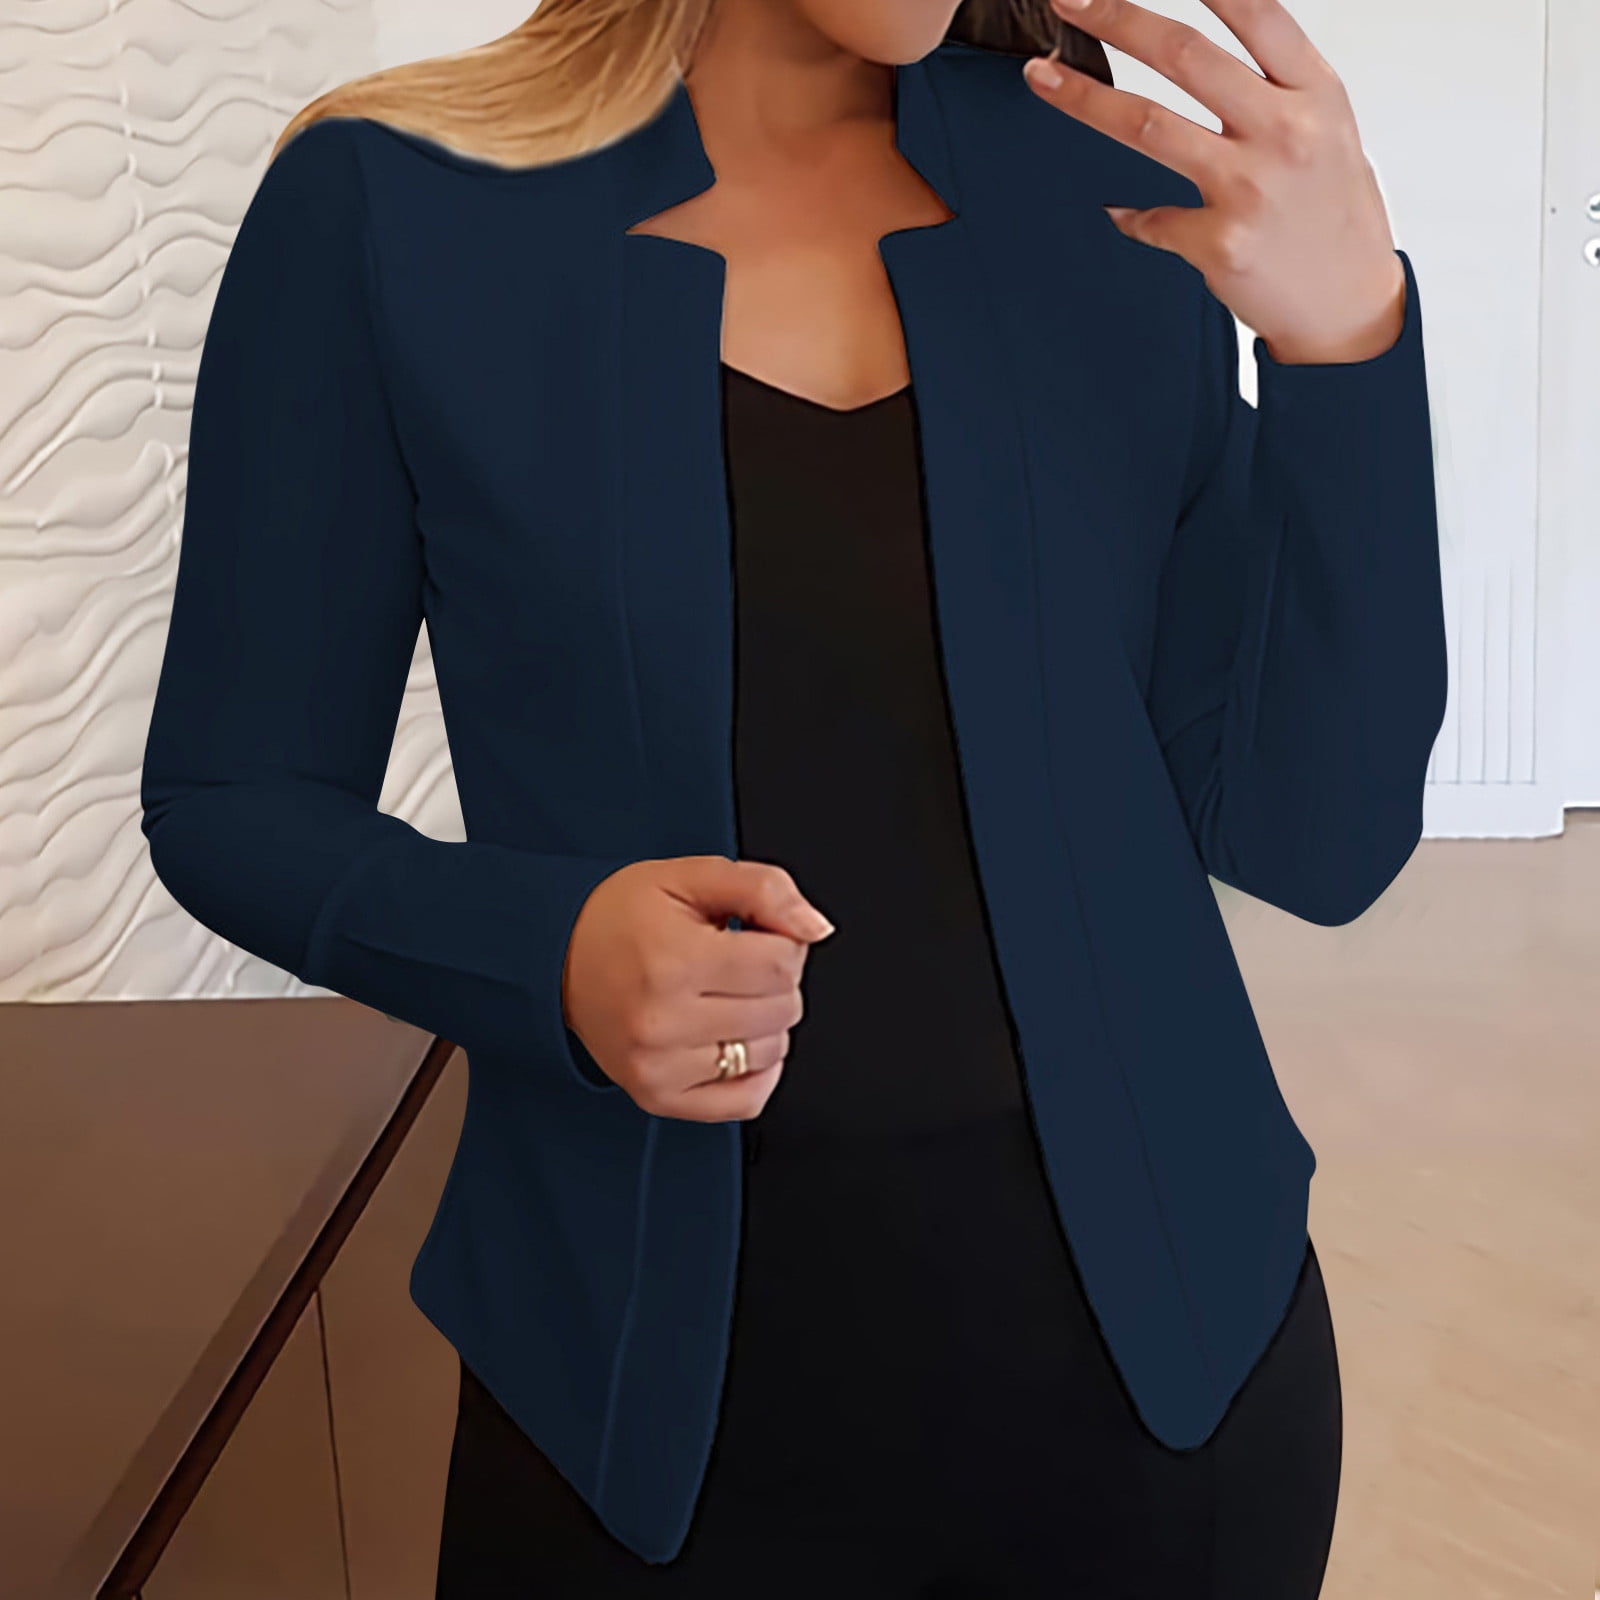 Ecqkame Women's Blazer Jackets Elegant Business Office Work Lady Solid  Button Suit Jacket Coat Outwear with Pocketed Navy M 